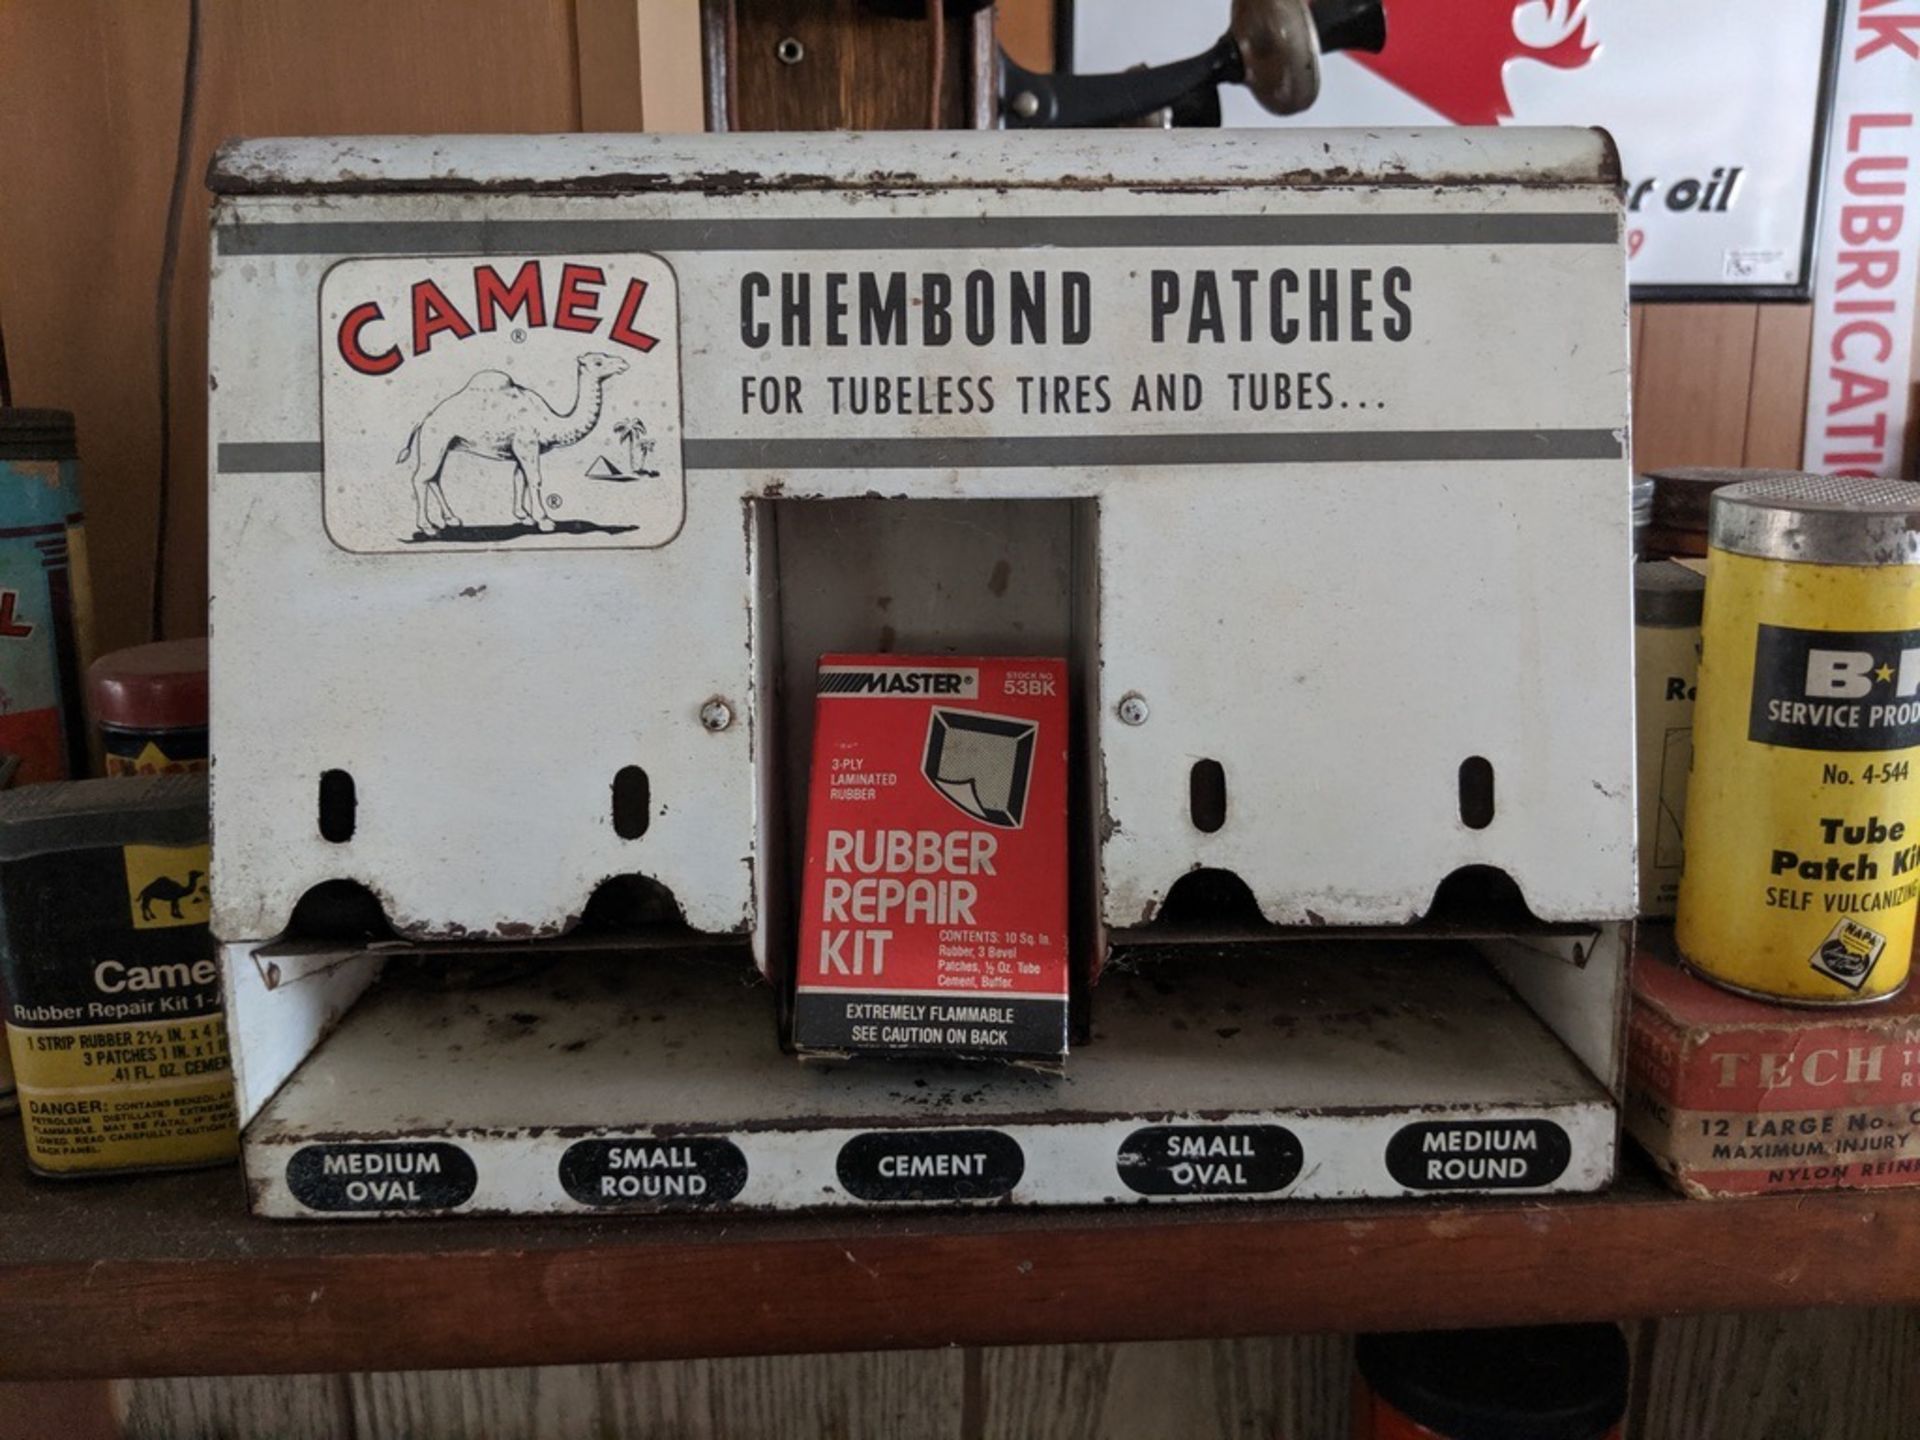 Camel Chembond Patches Display and Other Tube Repair Kits - Image 3 of 4